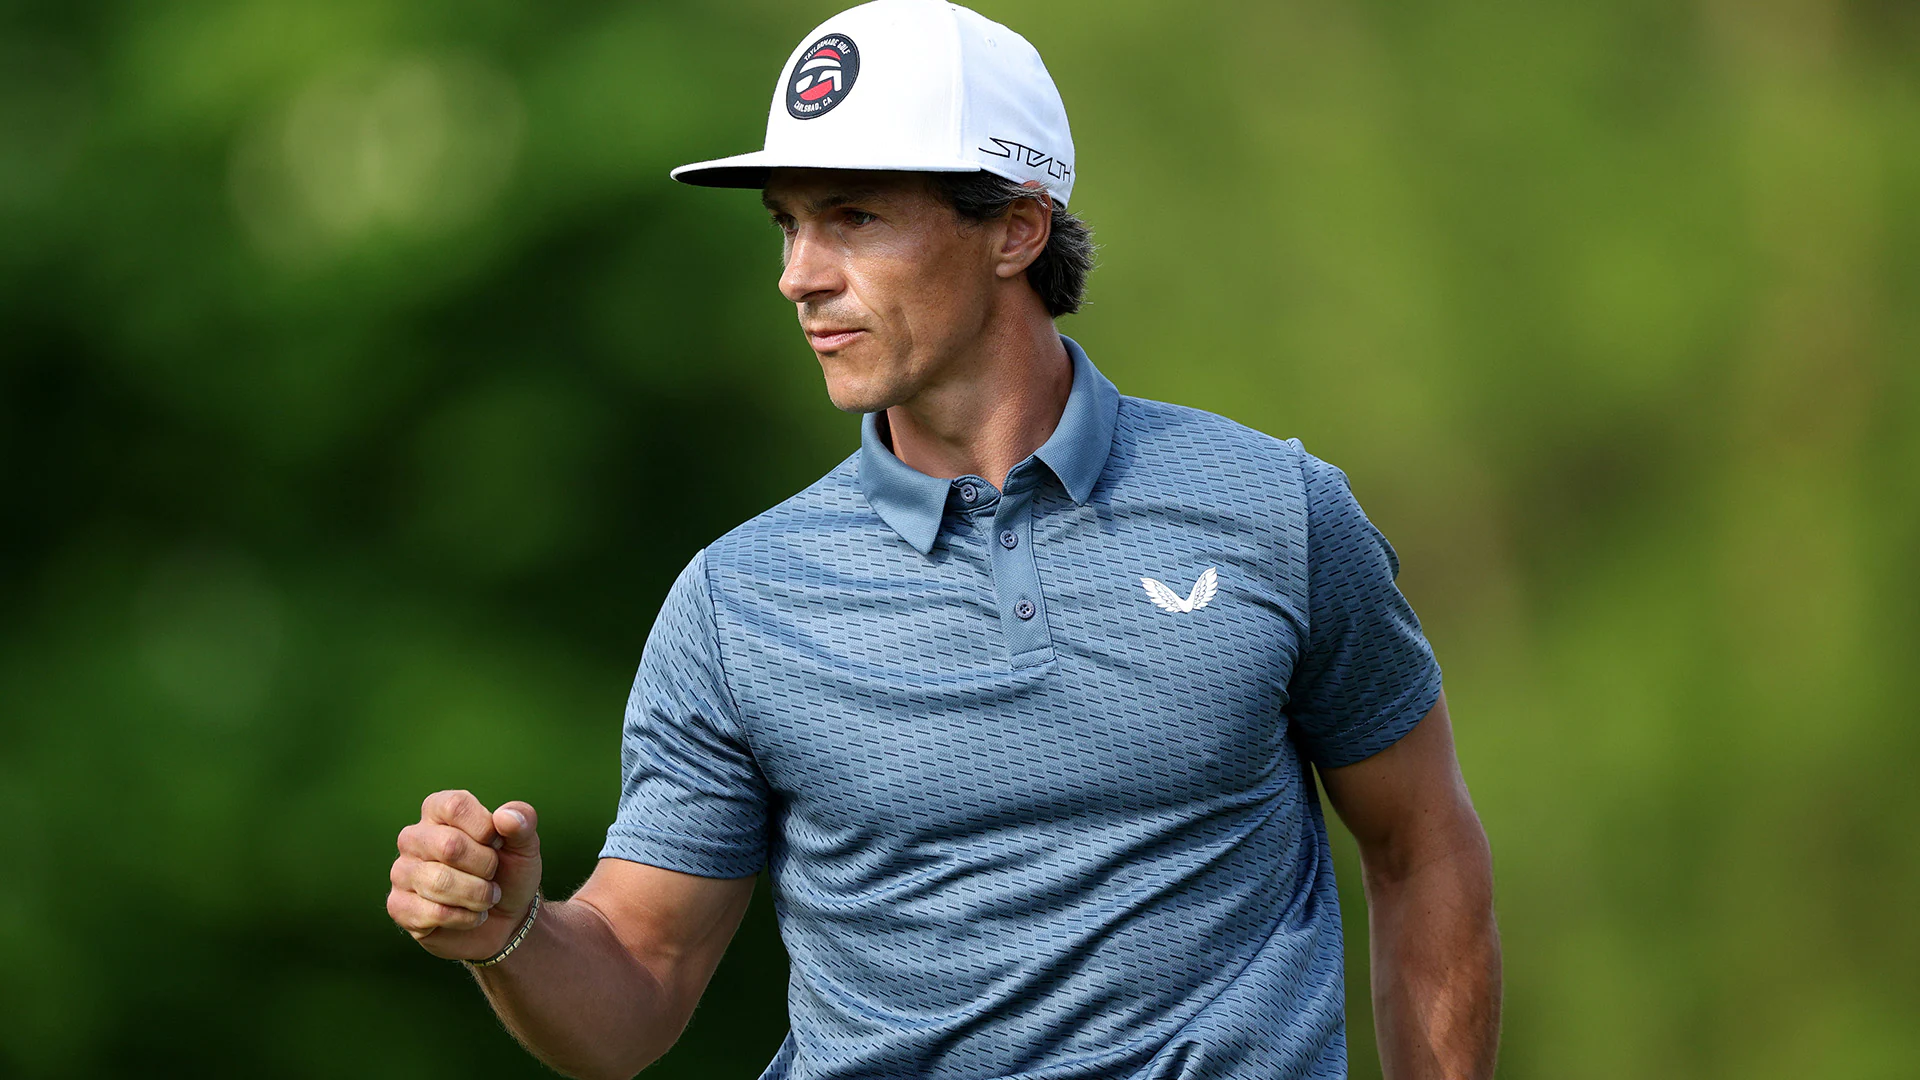 Thorbjorn Olesen finishes eagle-birdie, leads by 3 at British Masters